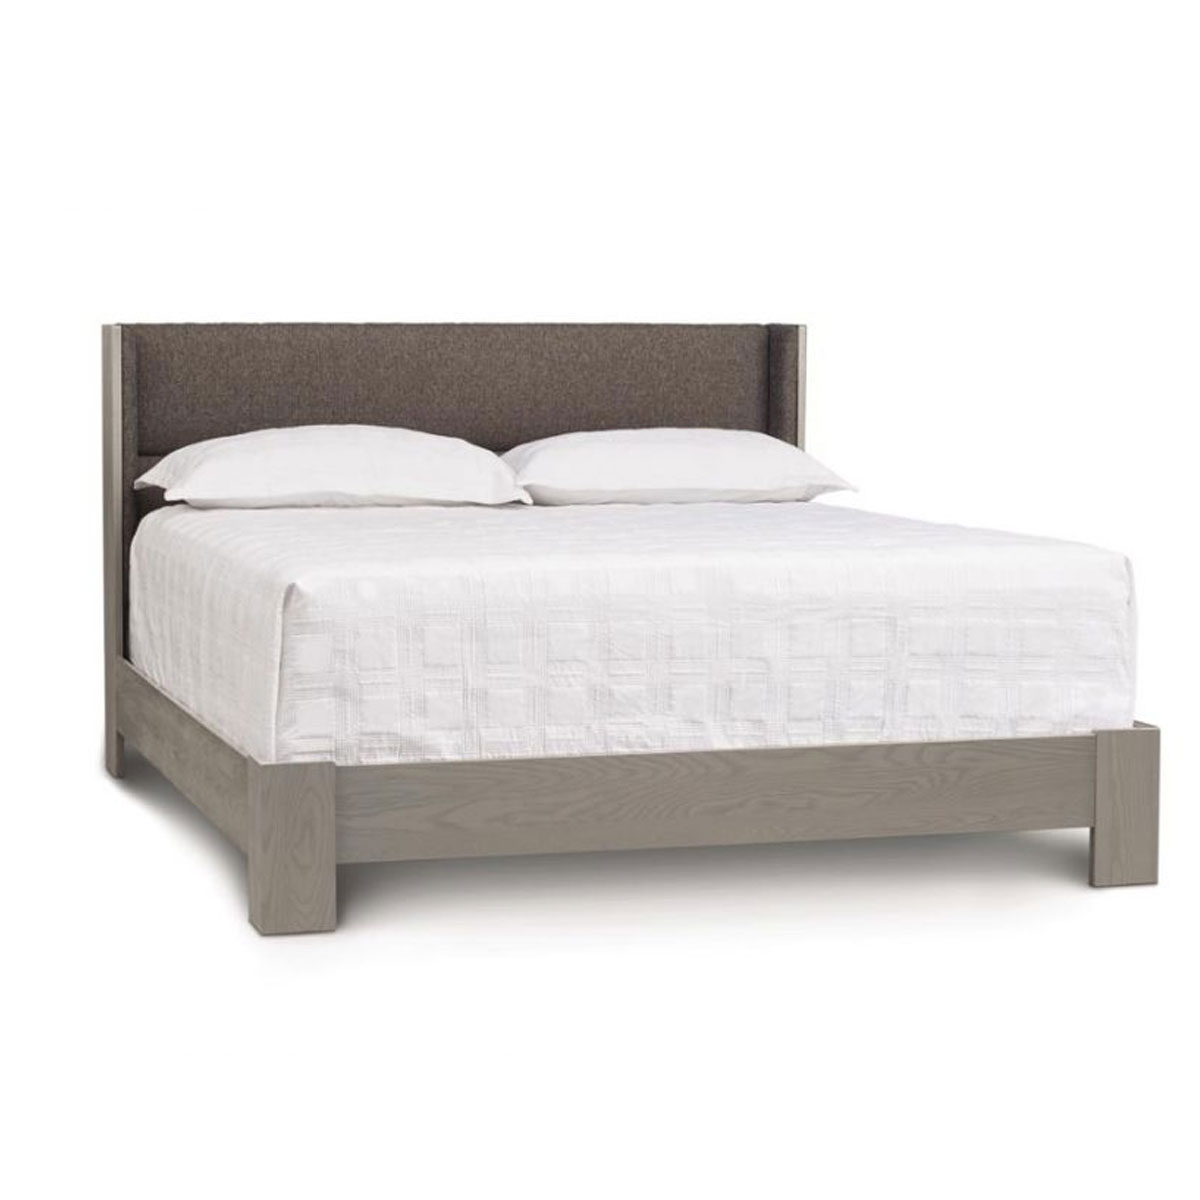 Copeland Sloane Bed for Mattress and Box Spring in Oak